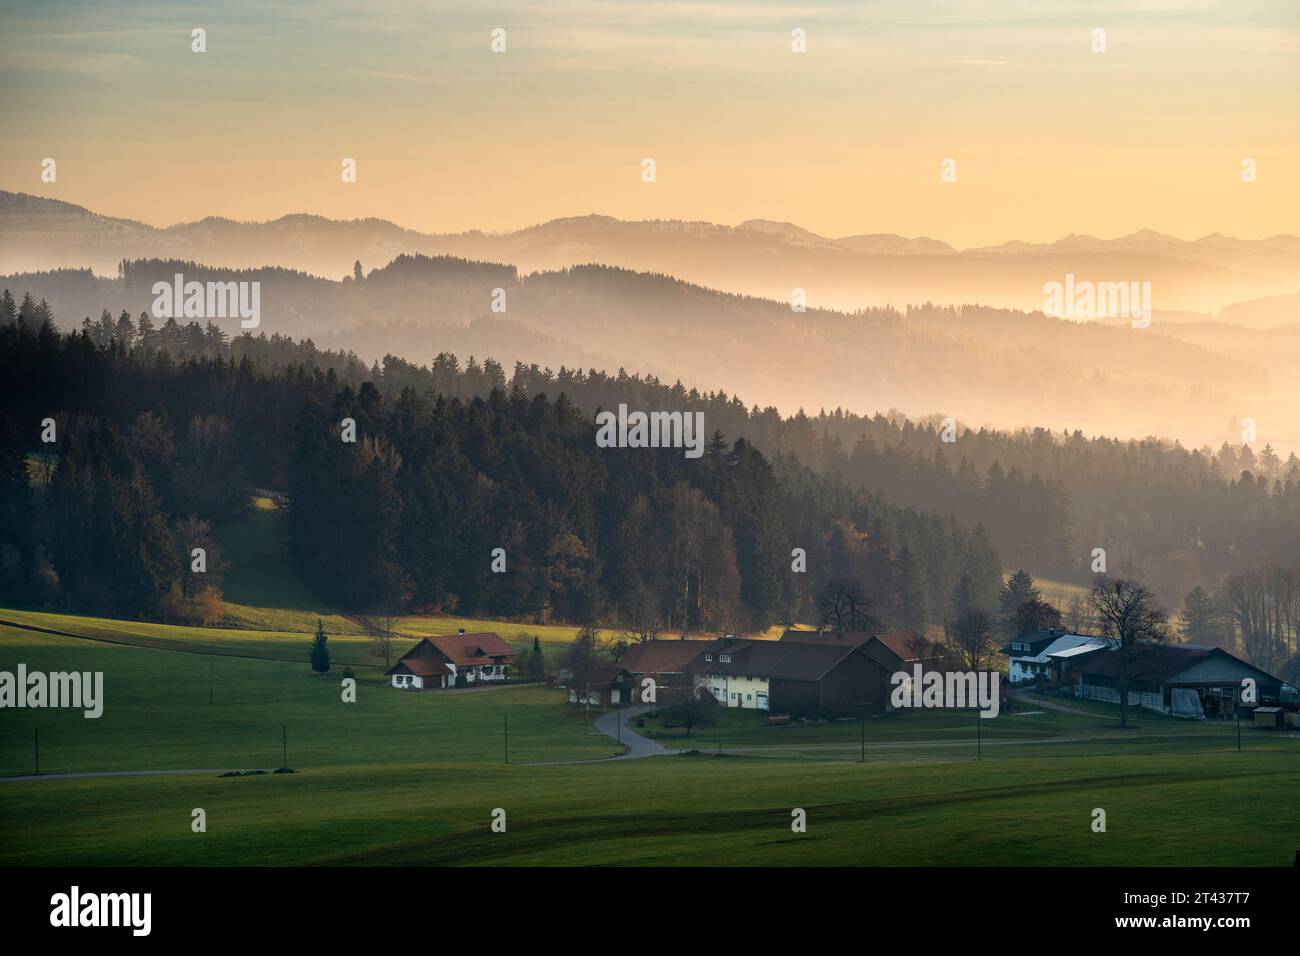 Landscape in the Allgäu in autumn at sunset. Farms and houses in front, mountains in the background. Allgäu, Germany. Image taken from public ground. Stock Photo